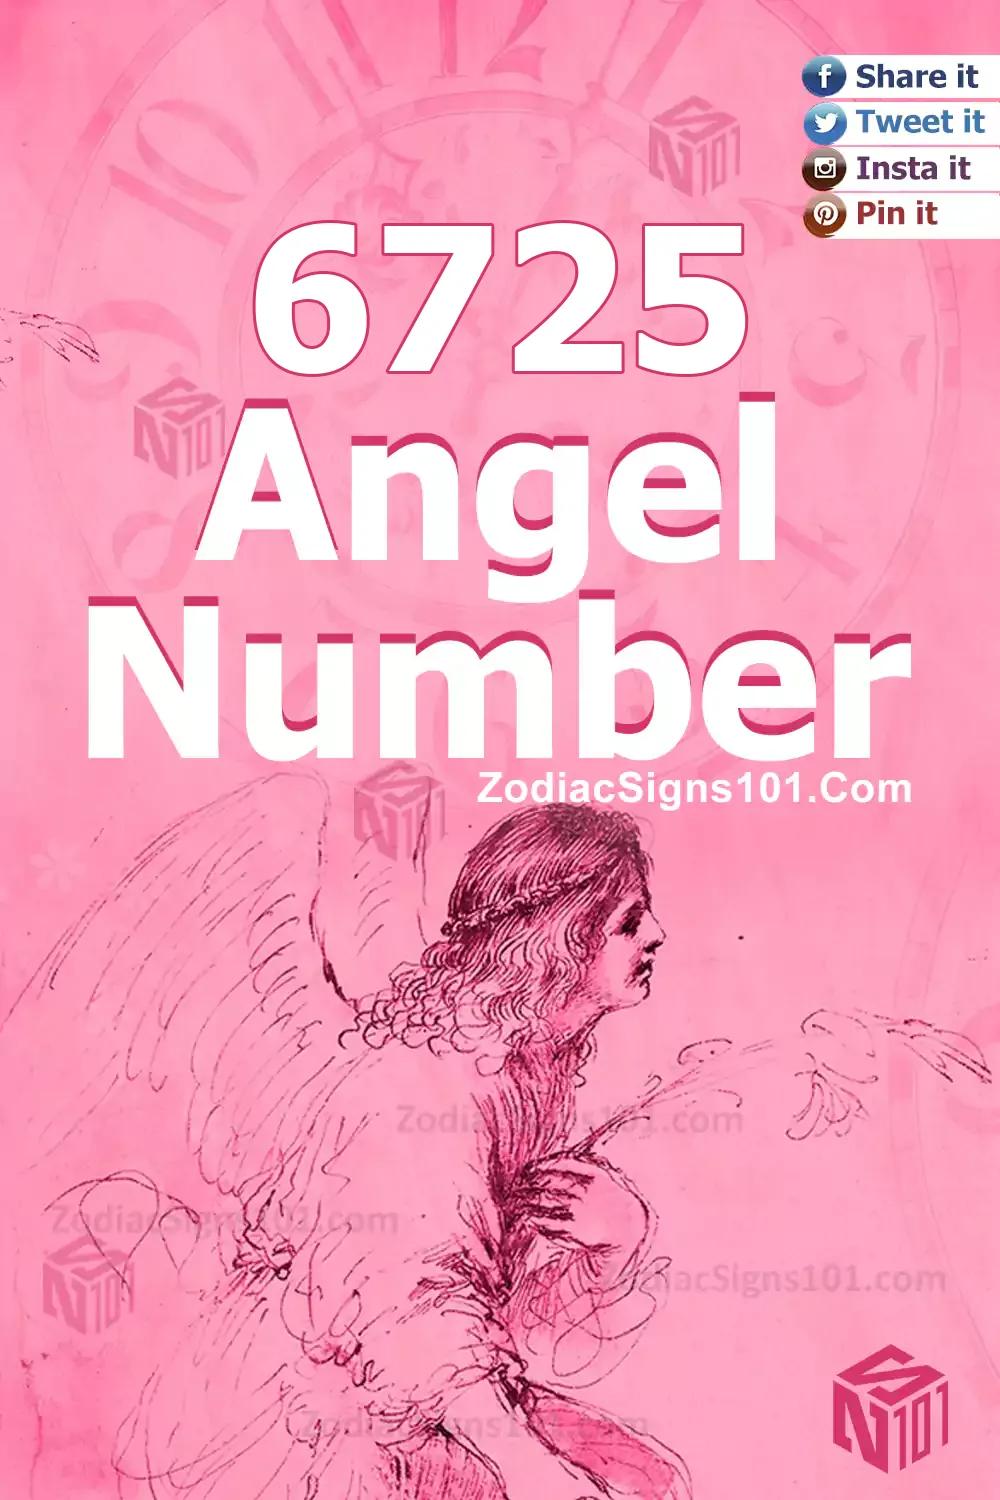 6725 Angel Number Meaning